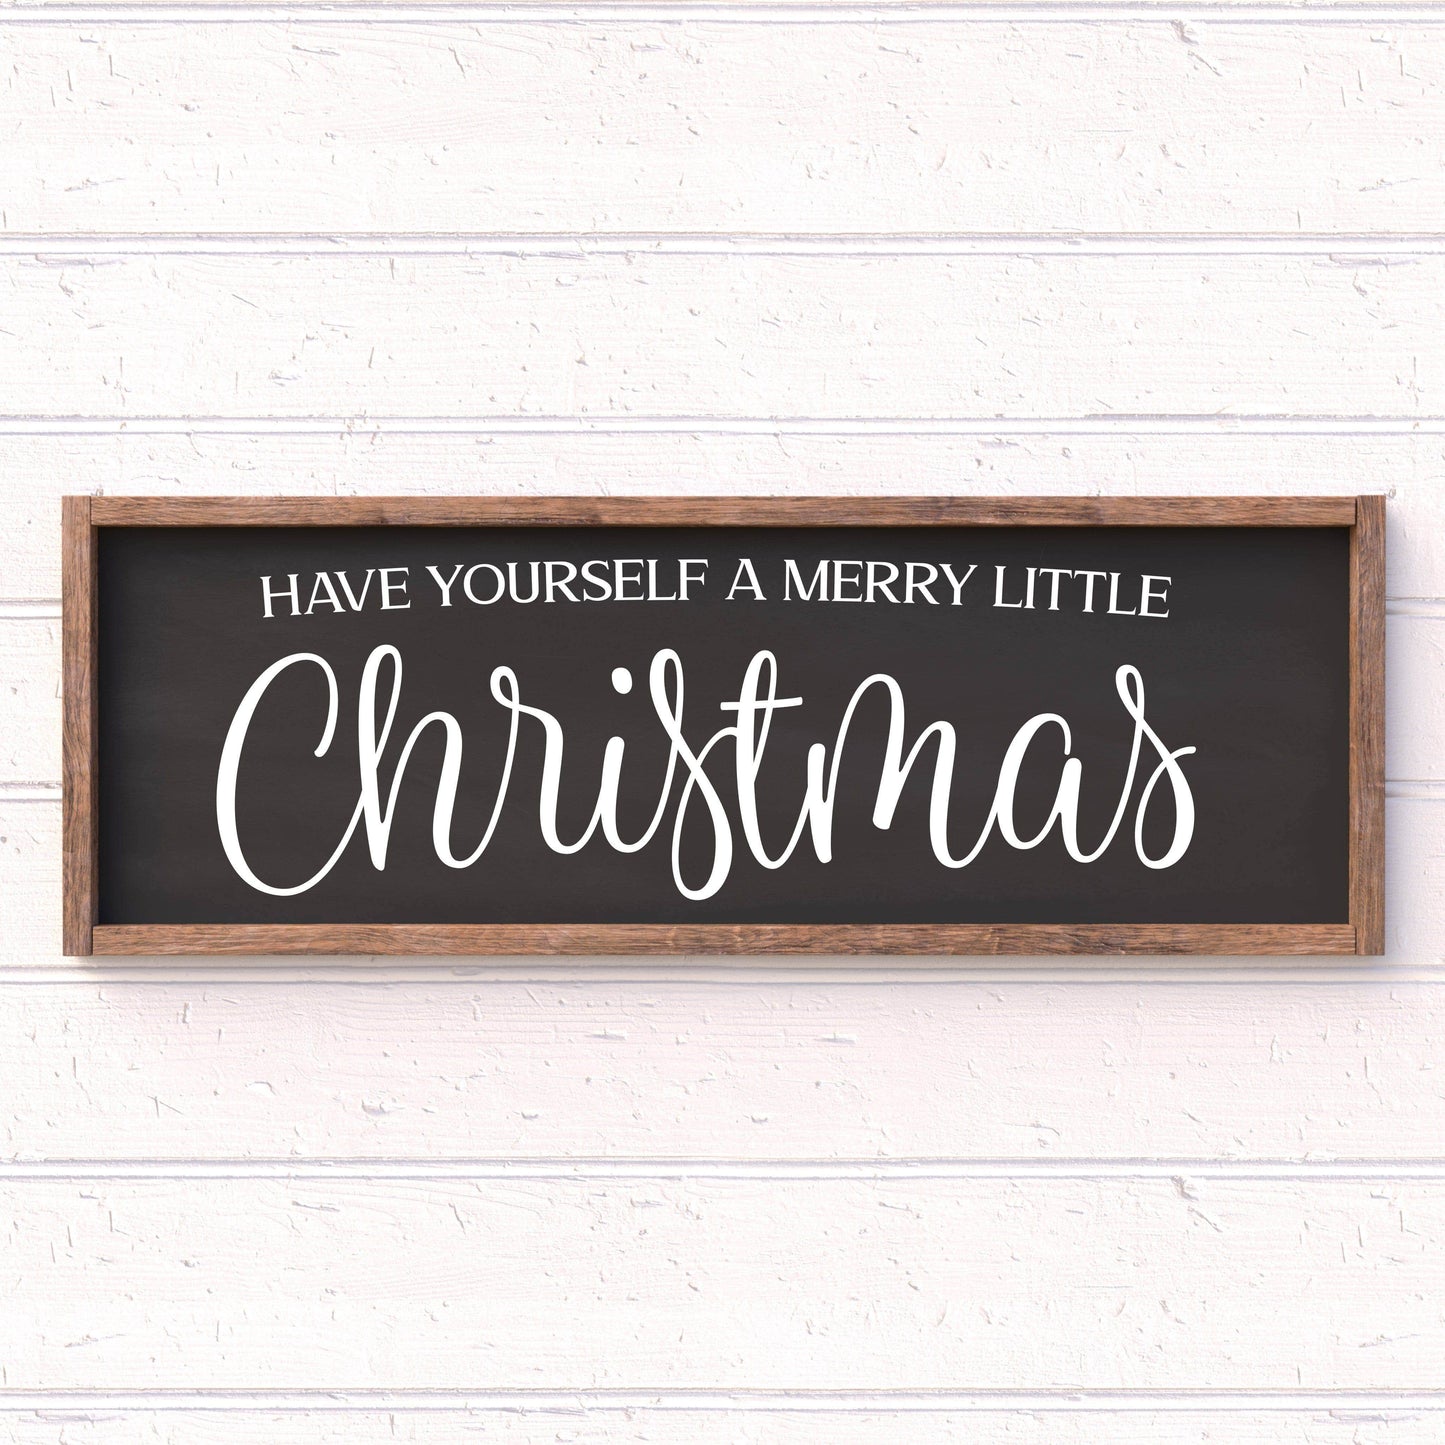 Have yourself a Merry Little Christmas - Framed Christmas Wood sign